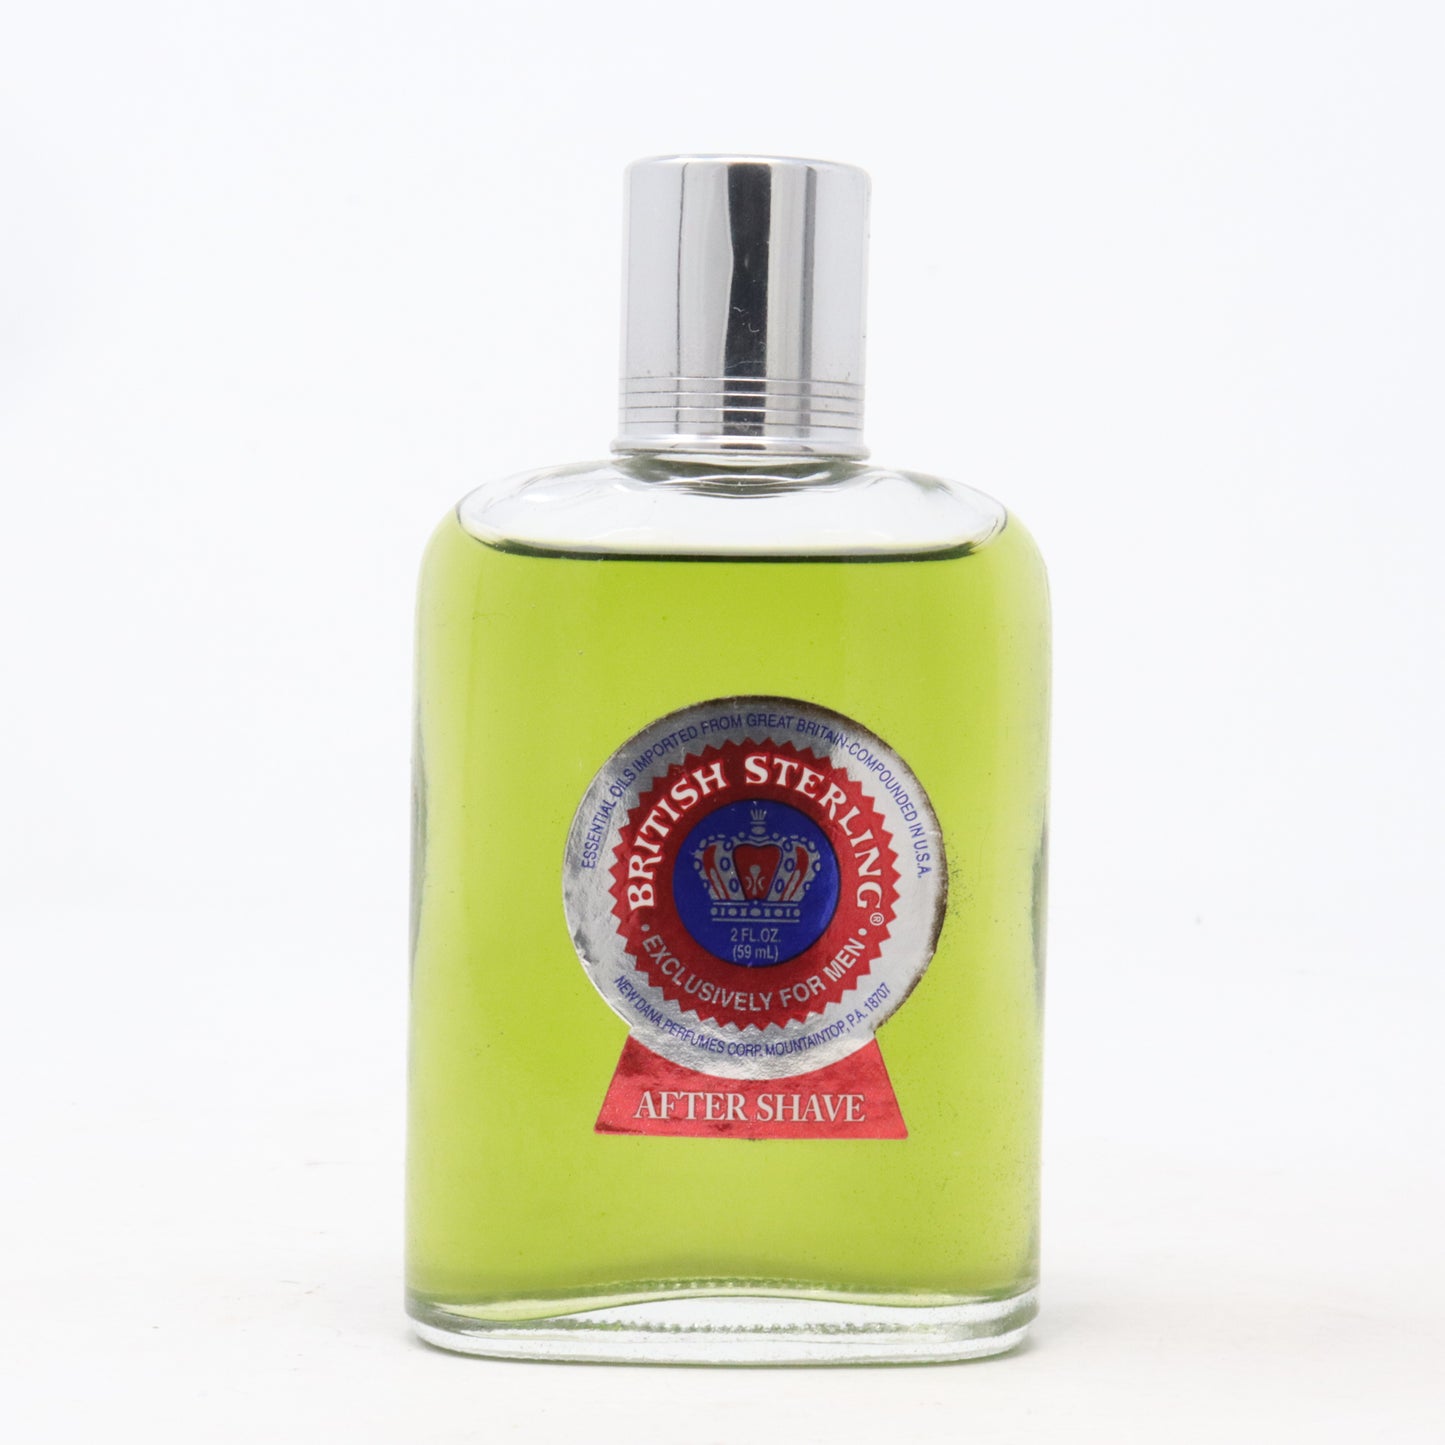 After Shave 59 ml